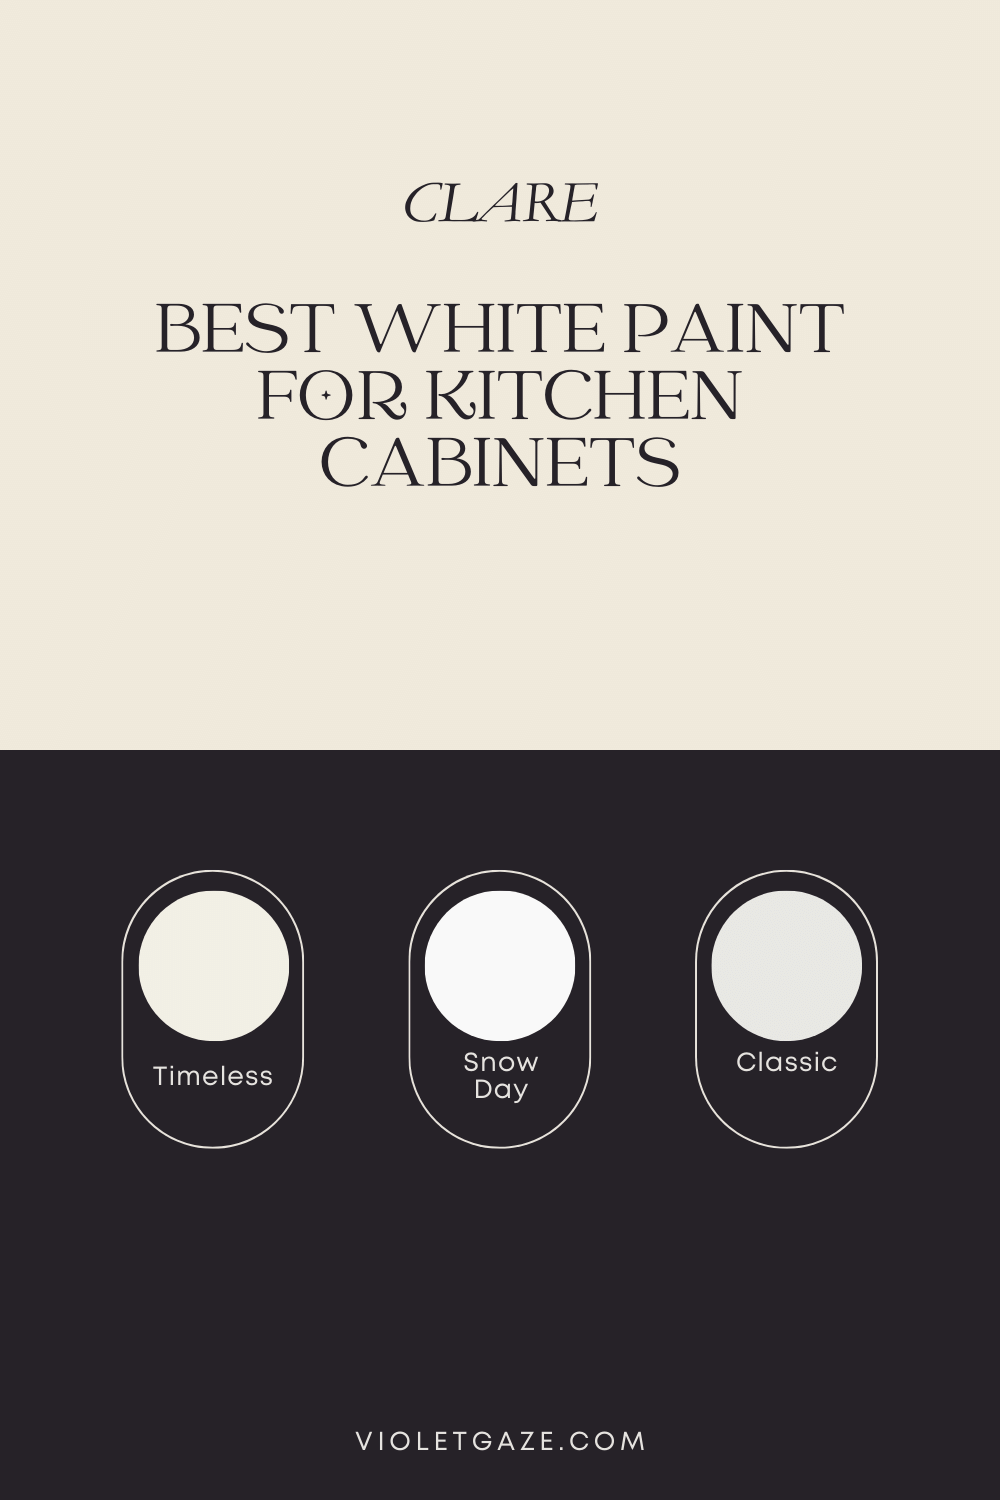 best white paint for kitchen cabinets clare